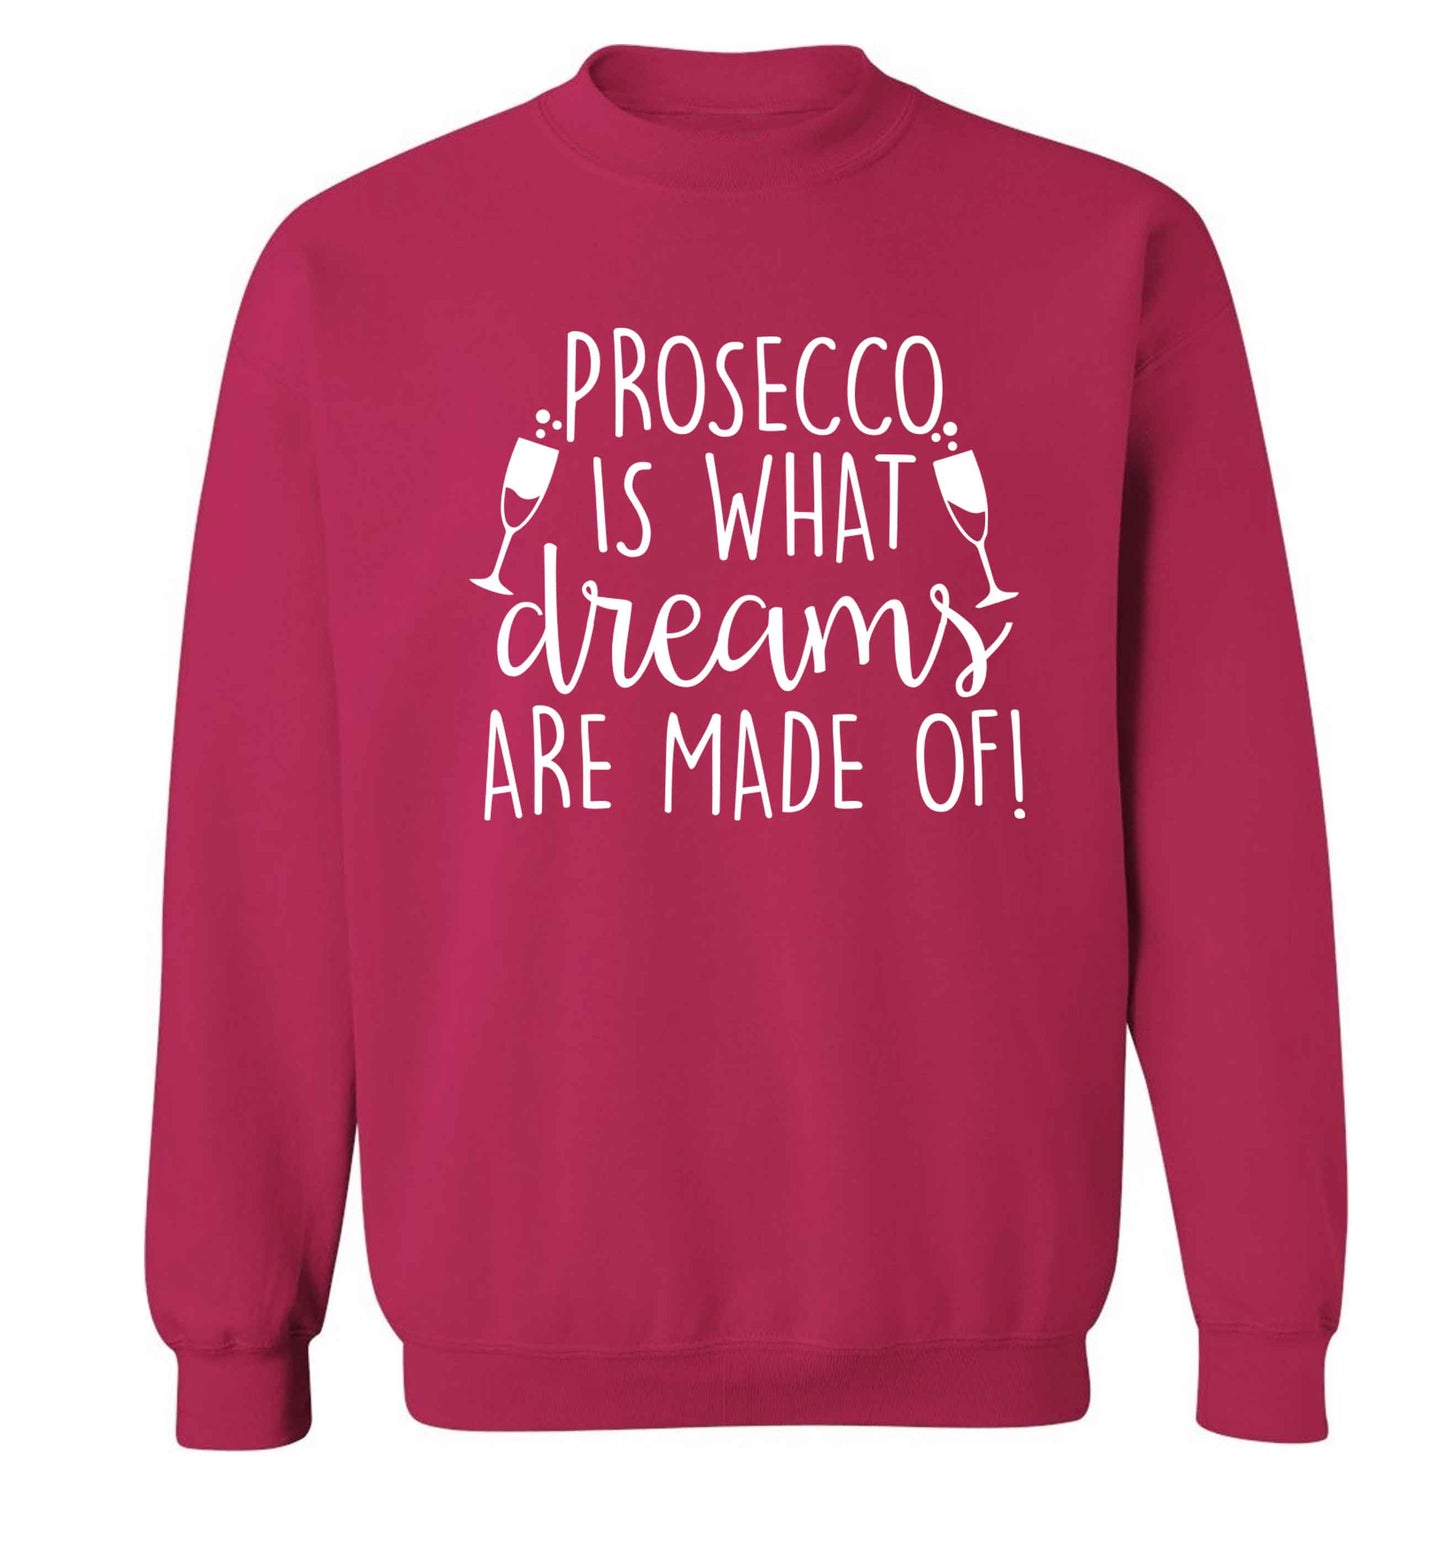 Prosecco is what dreams are made of Adult's unisex pink Sweater 2XL